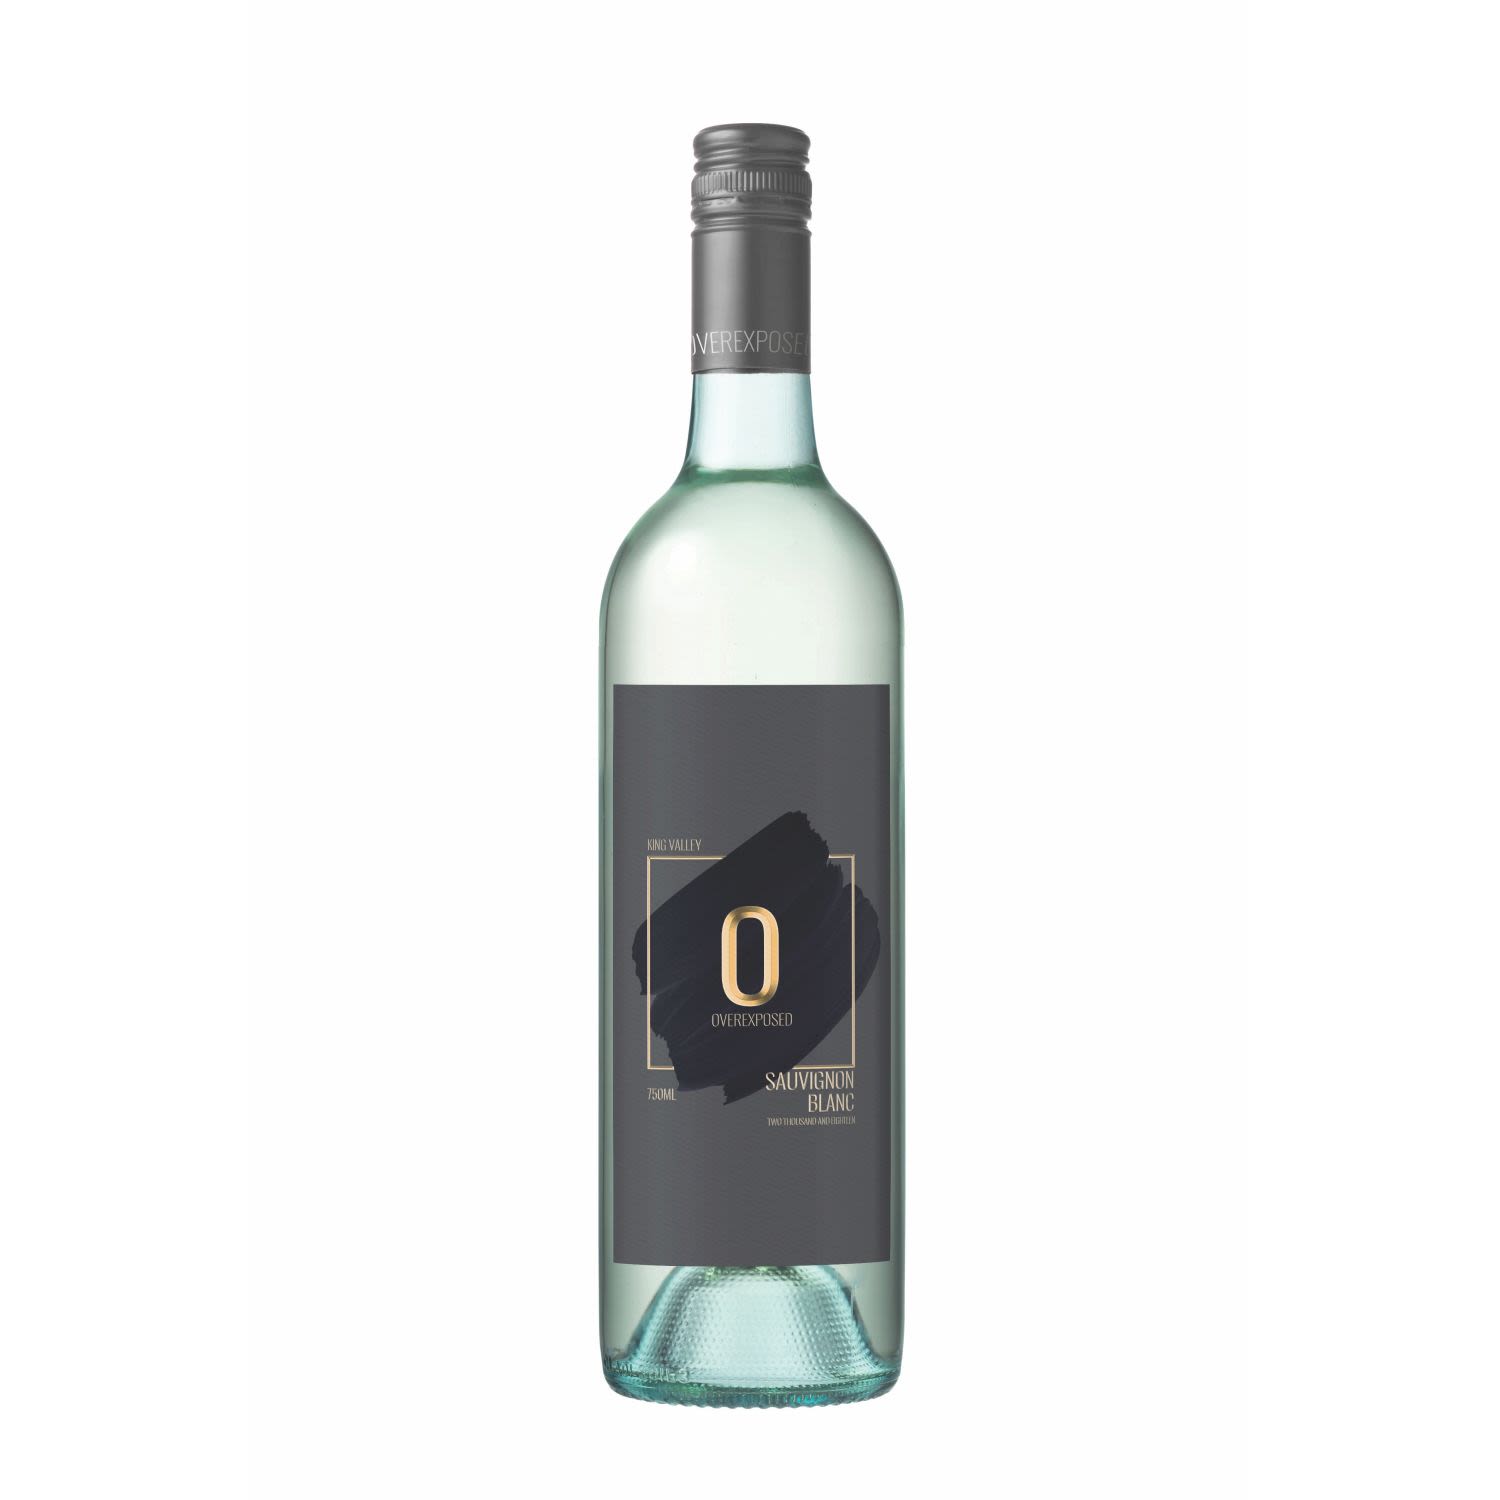 The Overexposed Sauvignon Blanc is crisp, elegant and fresh thanks to the cool climate of Australia’s King Valley located in the Victorian high country. Pairs perfectly with seafood, spring vegetables and roast chicken.<br /> <br />Alcohol Volume: 13.00%<br /><br />Pack Format: Bottle<br /><br />Standard Drinks: 7.7</br /><br />Pack Type: Bottle<br /><br />Country of Origin: Australia<br /><br />Region: King Valley<br /><br />Vintage: Vintages Vary<br />